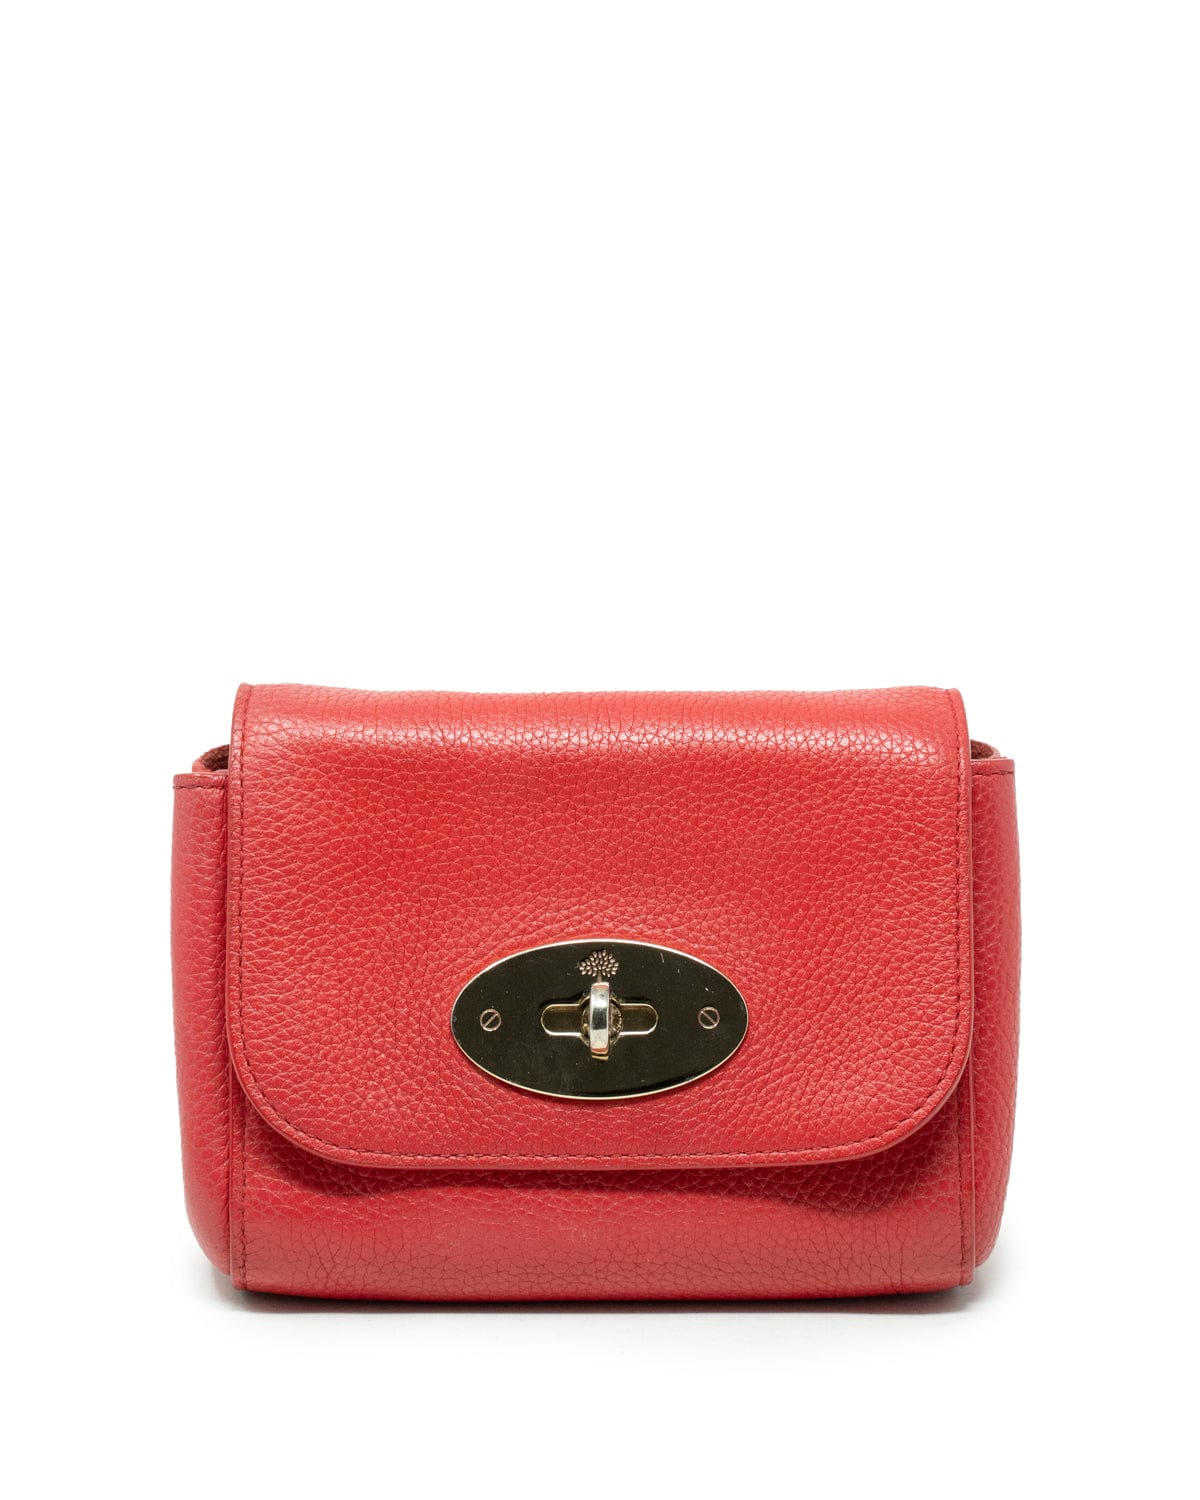 Mulberry Mulberry Red Leather Lily Crossbody Bag  - AGL1921